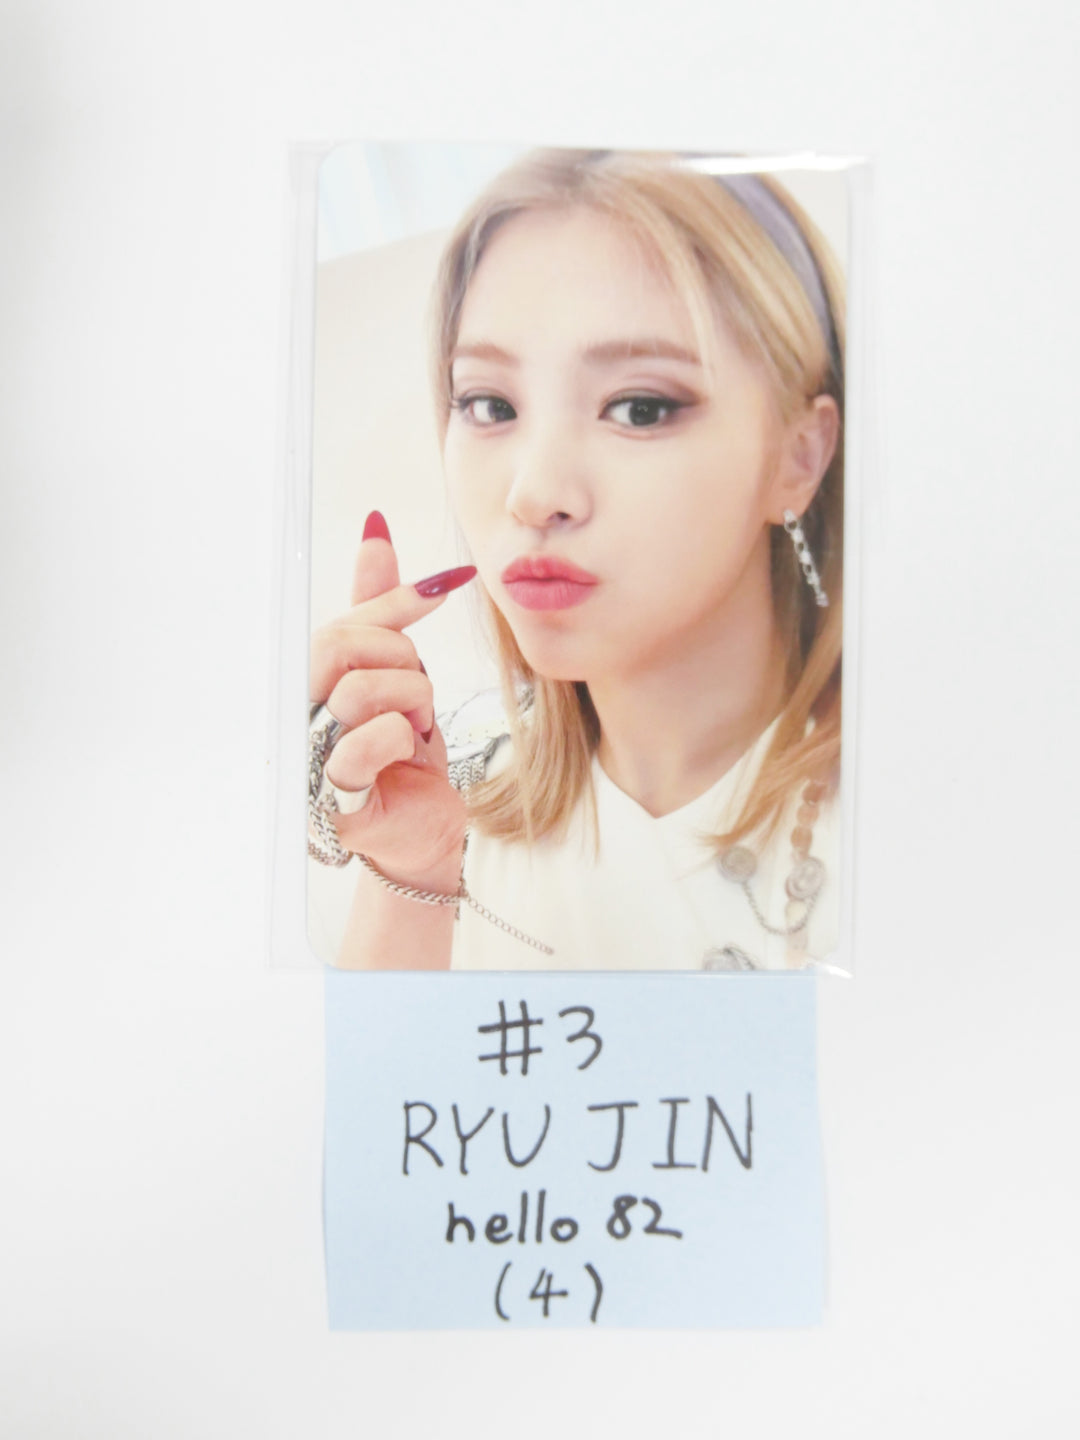 Itzy 'Guess Who' - Hello82 Pre-Order Benefit Photocard